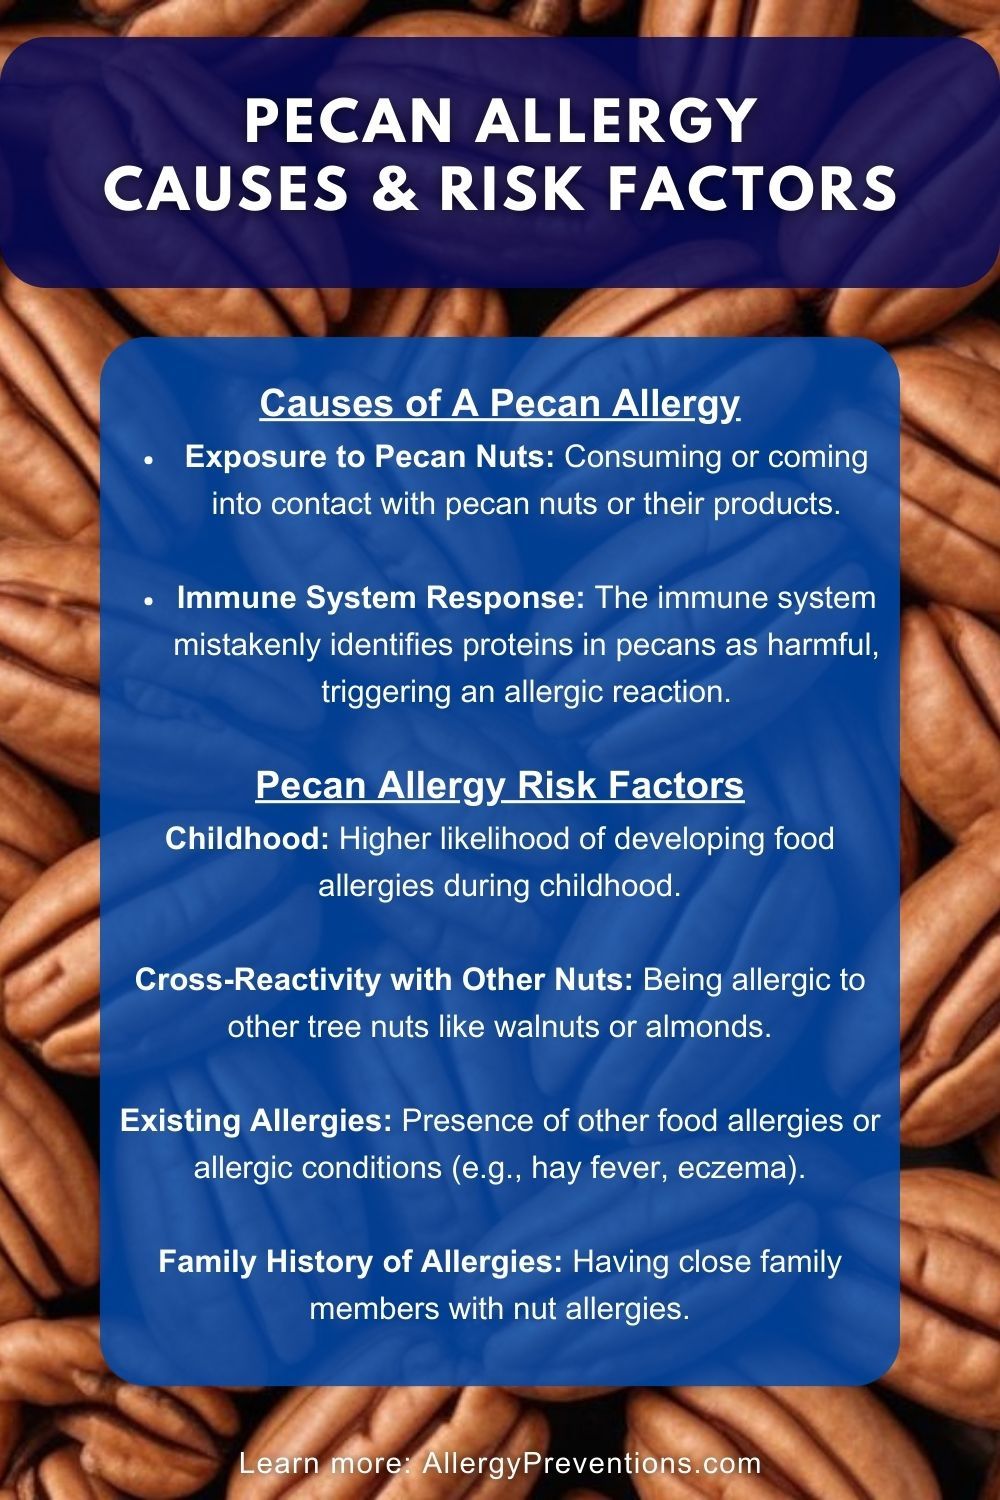 Pecan Allergy Causes and Risk Factors Infographic: Causes of A Pecan Allergy Exposure to Pecan Nuts: Consuming or coming into contact with pecan nuts or their products. Immune System Response: The immune system mistakenly identifies proteins in pecans as harmful, triggering an allergic reaction. Pecan Allergy Risk Factors Childhood: Higher likelihood of developing food allergies during childhood. Cross-Reactivity with Other Nuts: Being allergic to other tree nuts like walnuts or almonds. Existing Allergies: Presence of other food allergies or allergic conditions (e.g., hay fever, eczema). Family History of Allergies: Having close family members with nut allergies.